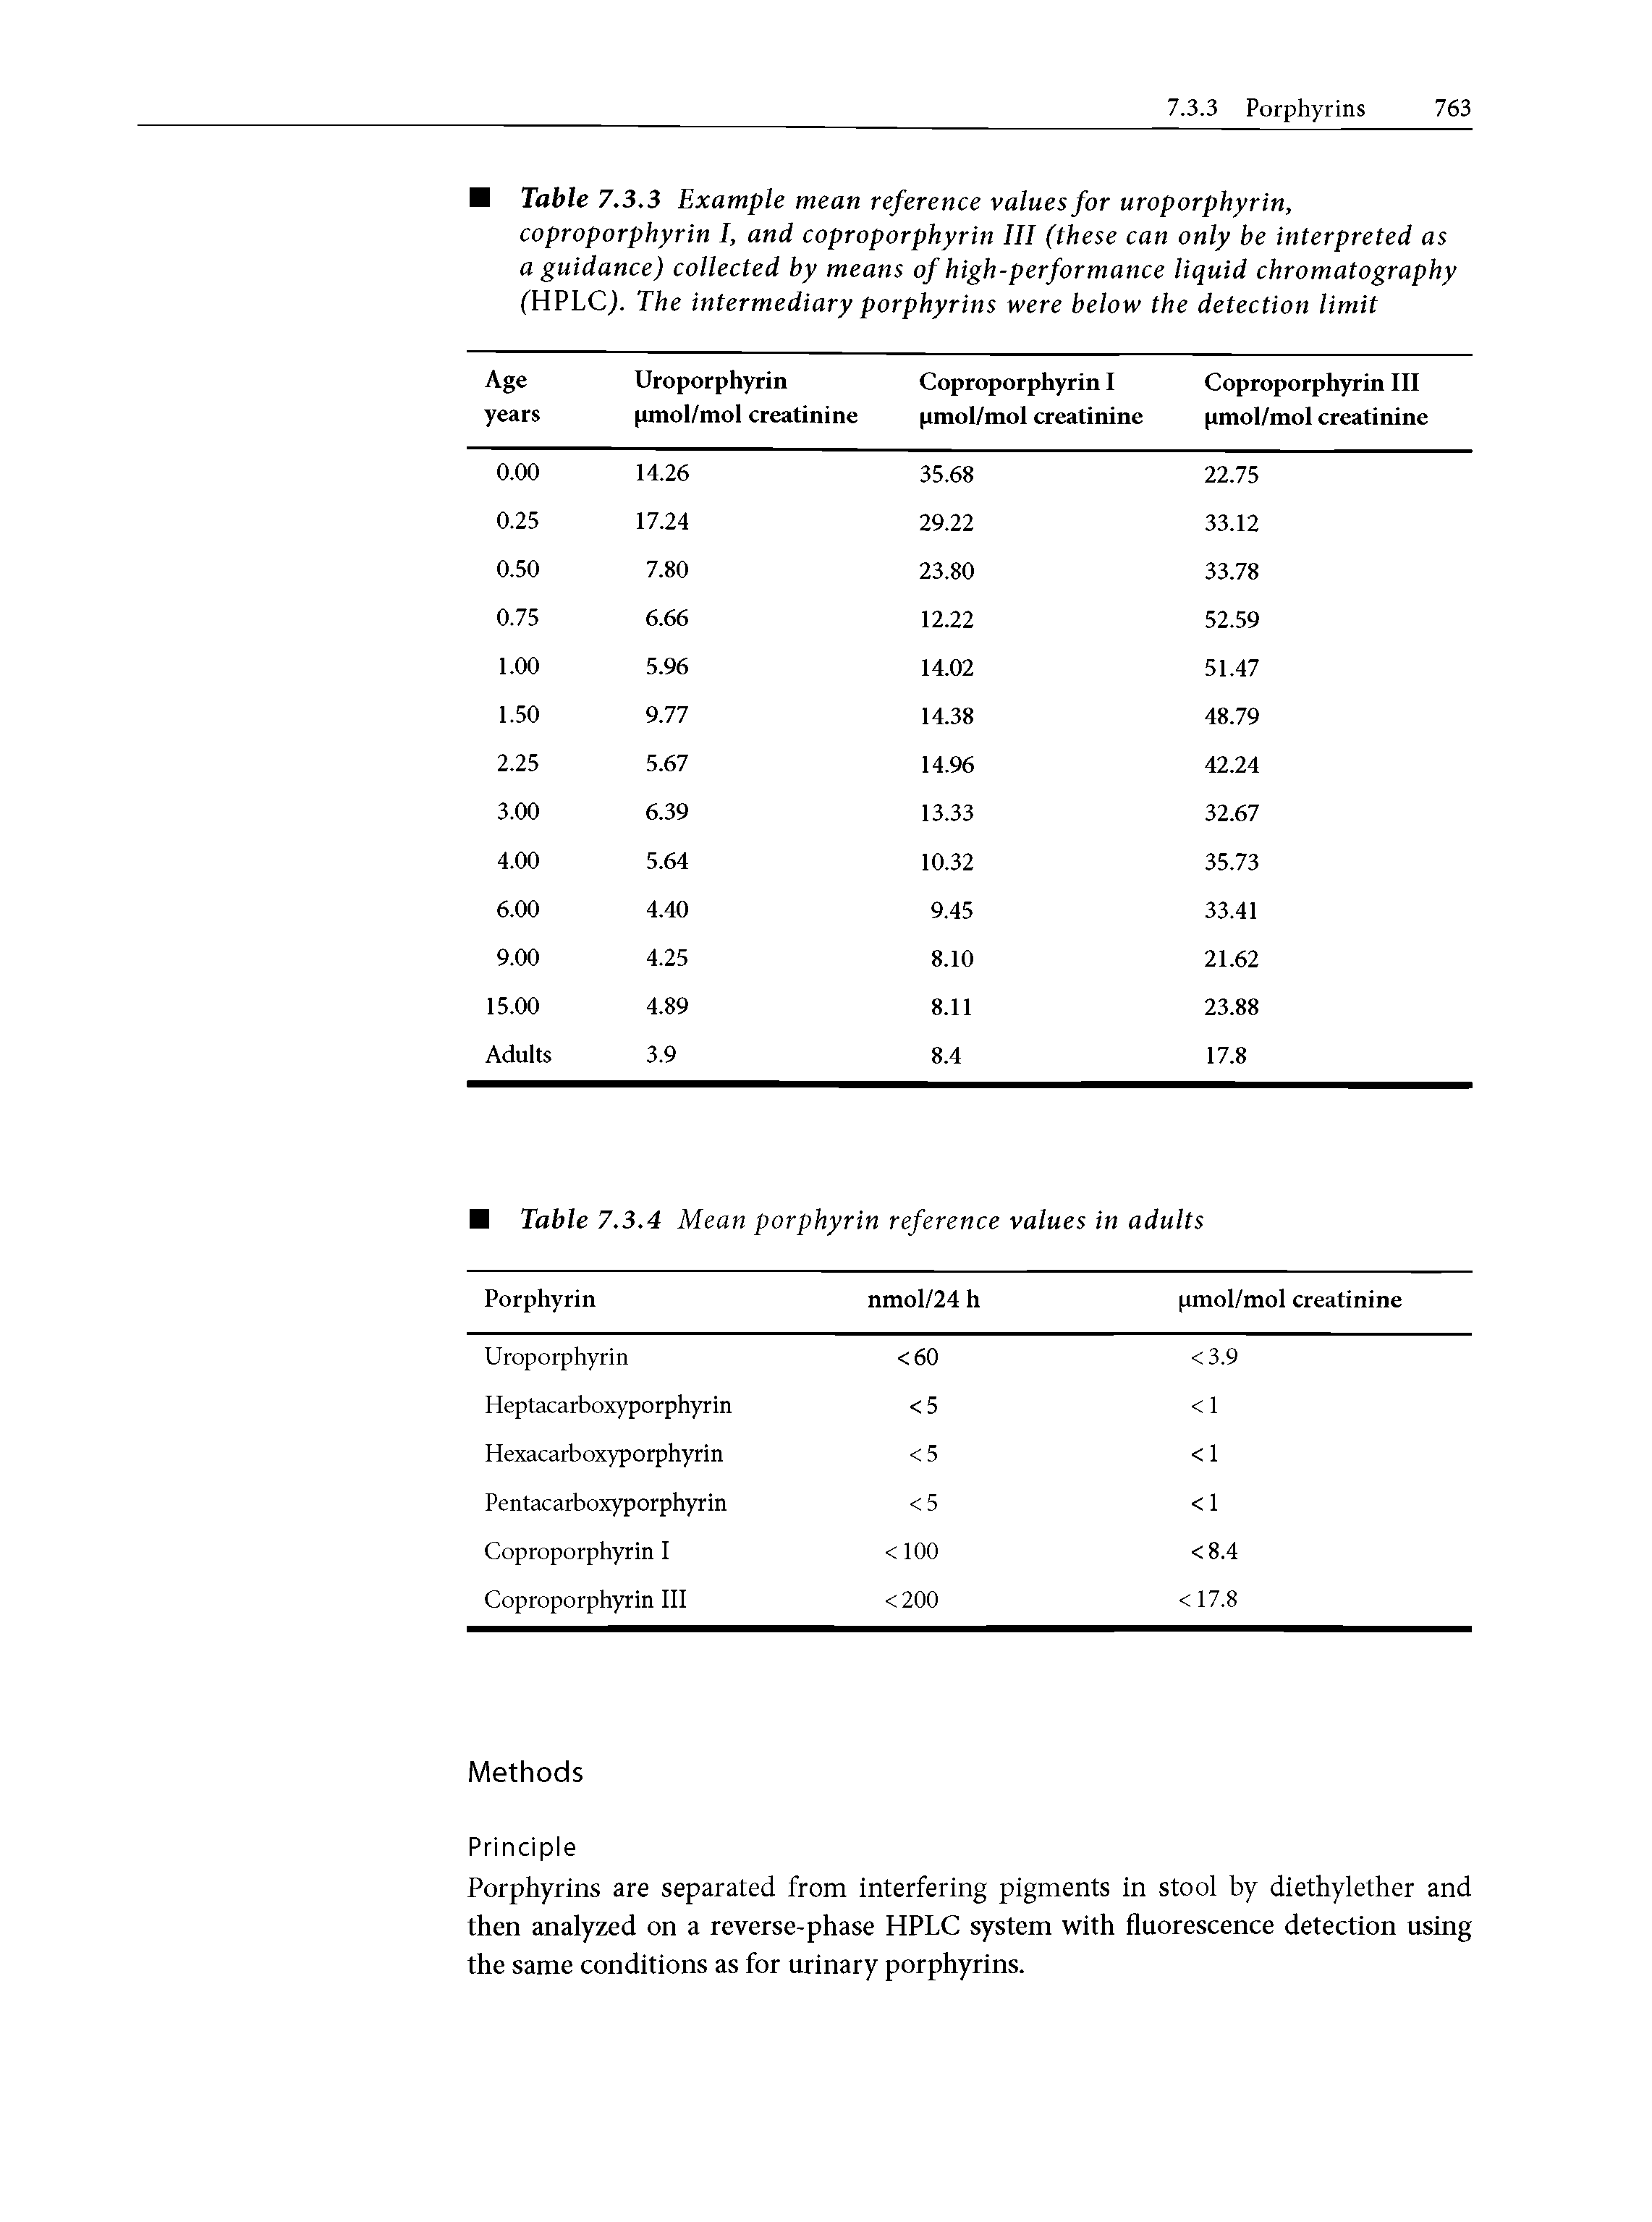 Table 7.3.3 Example mean reference values for uroporphyrin, coproporphyrin I, and coproporphyrin III (these can only be interpreted as a guidance) collected by means of high-performance liquid chromatography (HPLC). The intermediary porphyrins were below the detection limit...